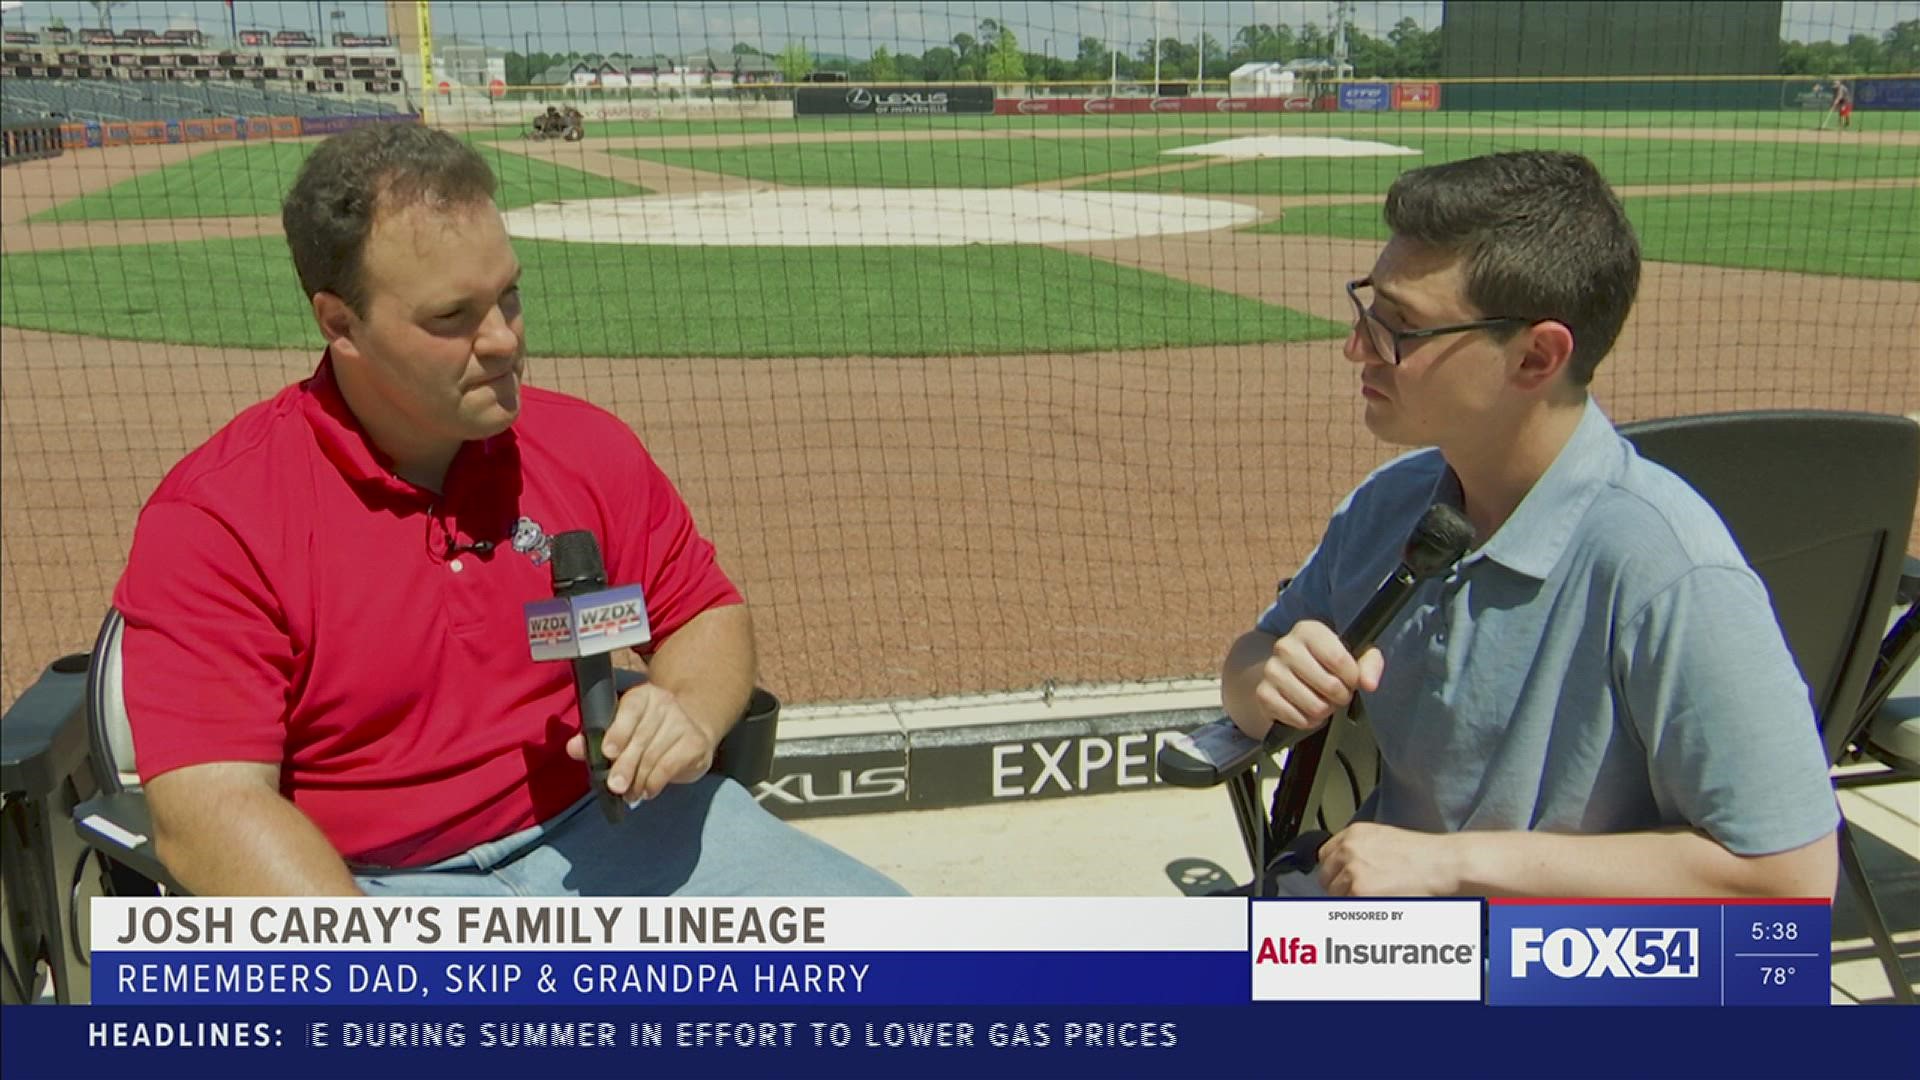 Josh Caray on family lineage: Remembers Dad, Skip and Grandpa Harry Caray.